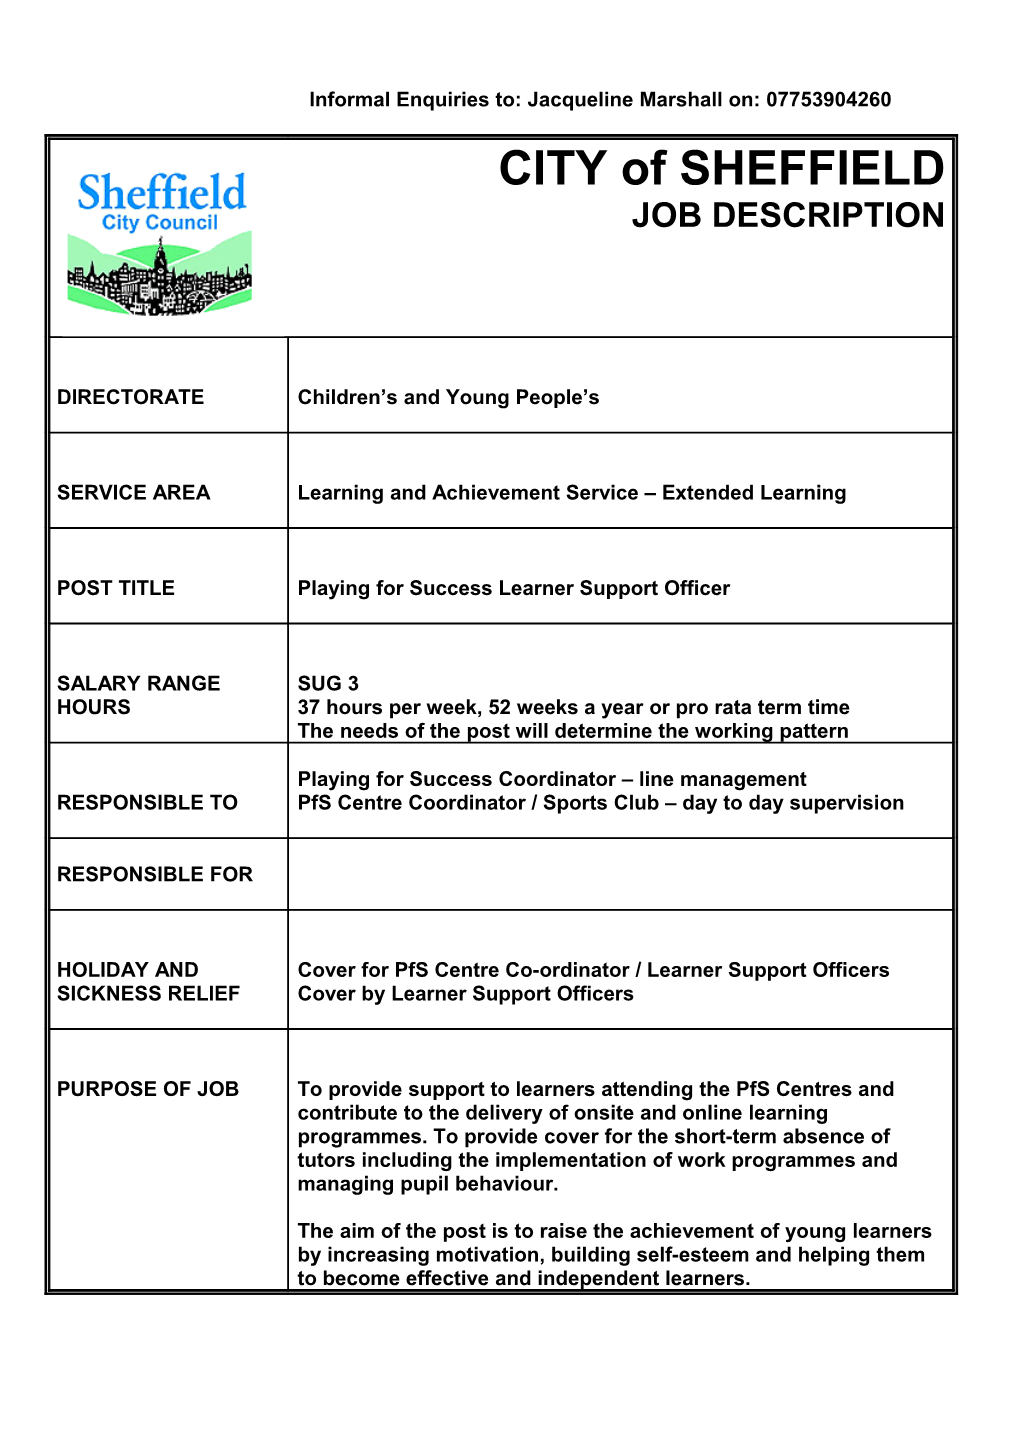 Playing for Success Learner Support Officer